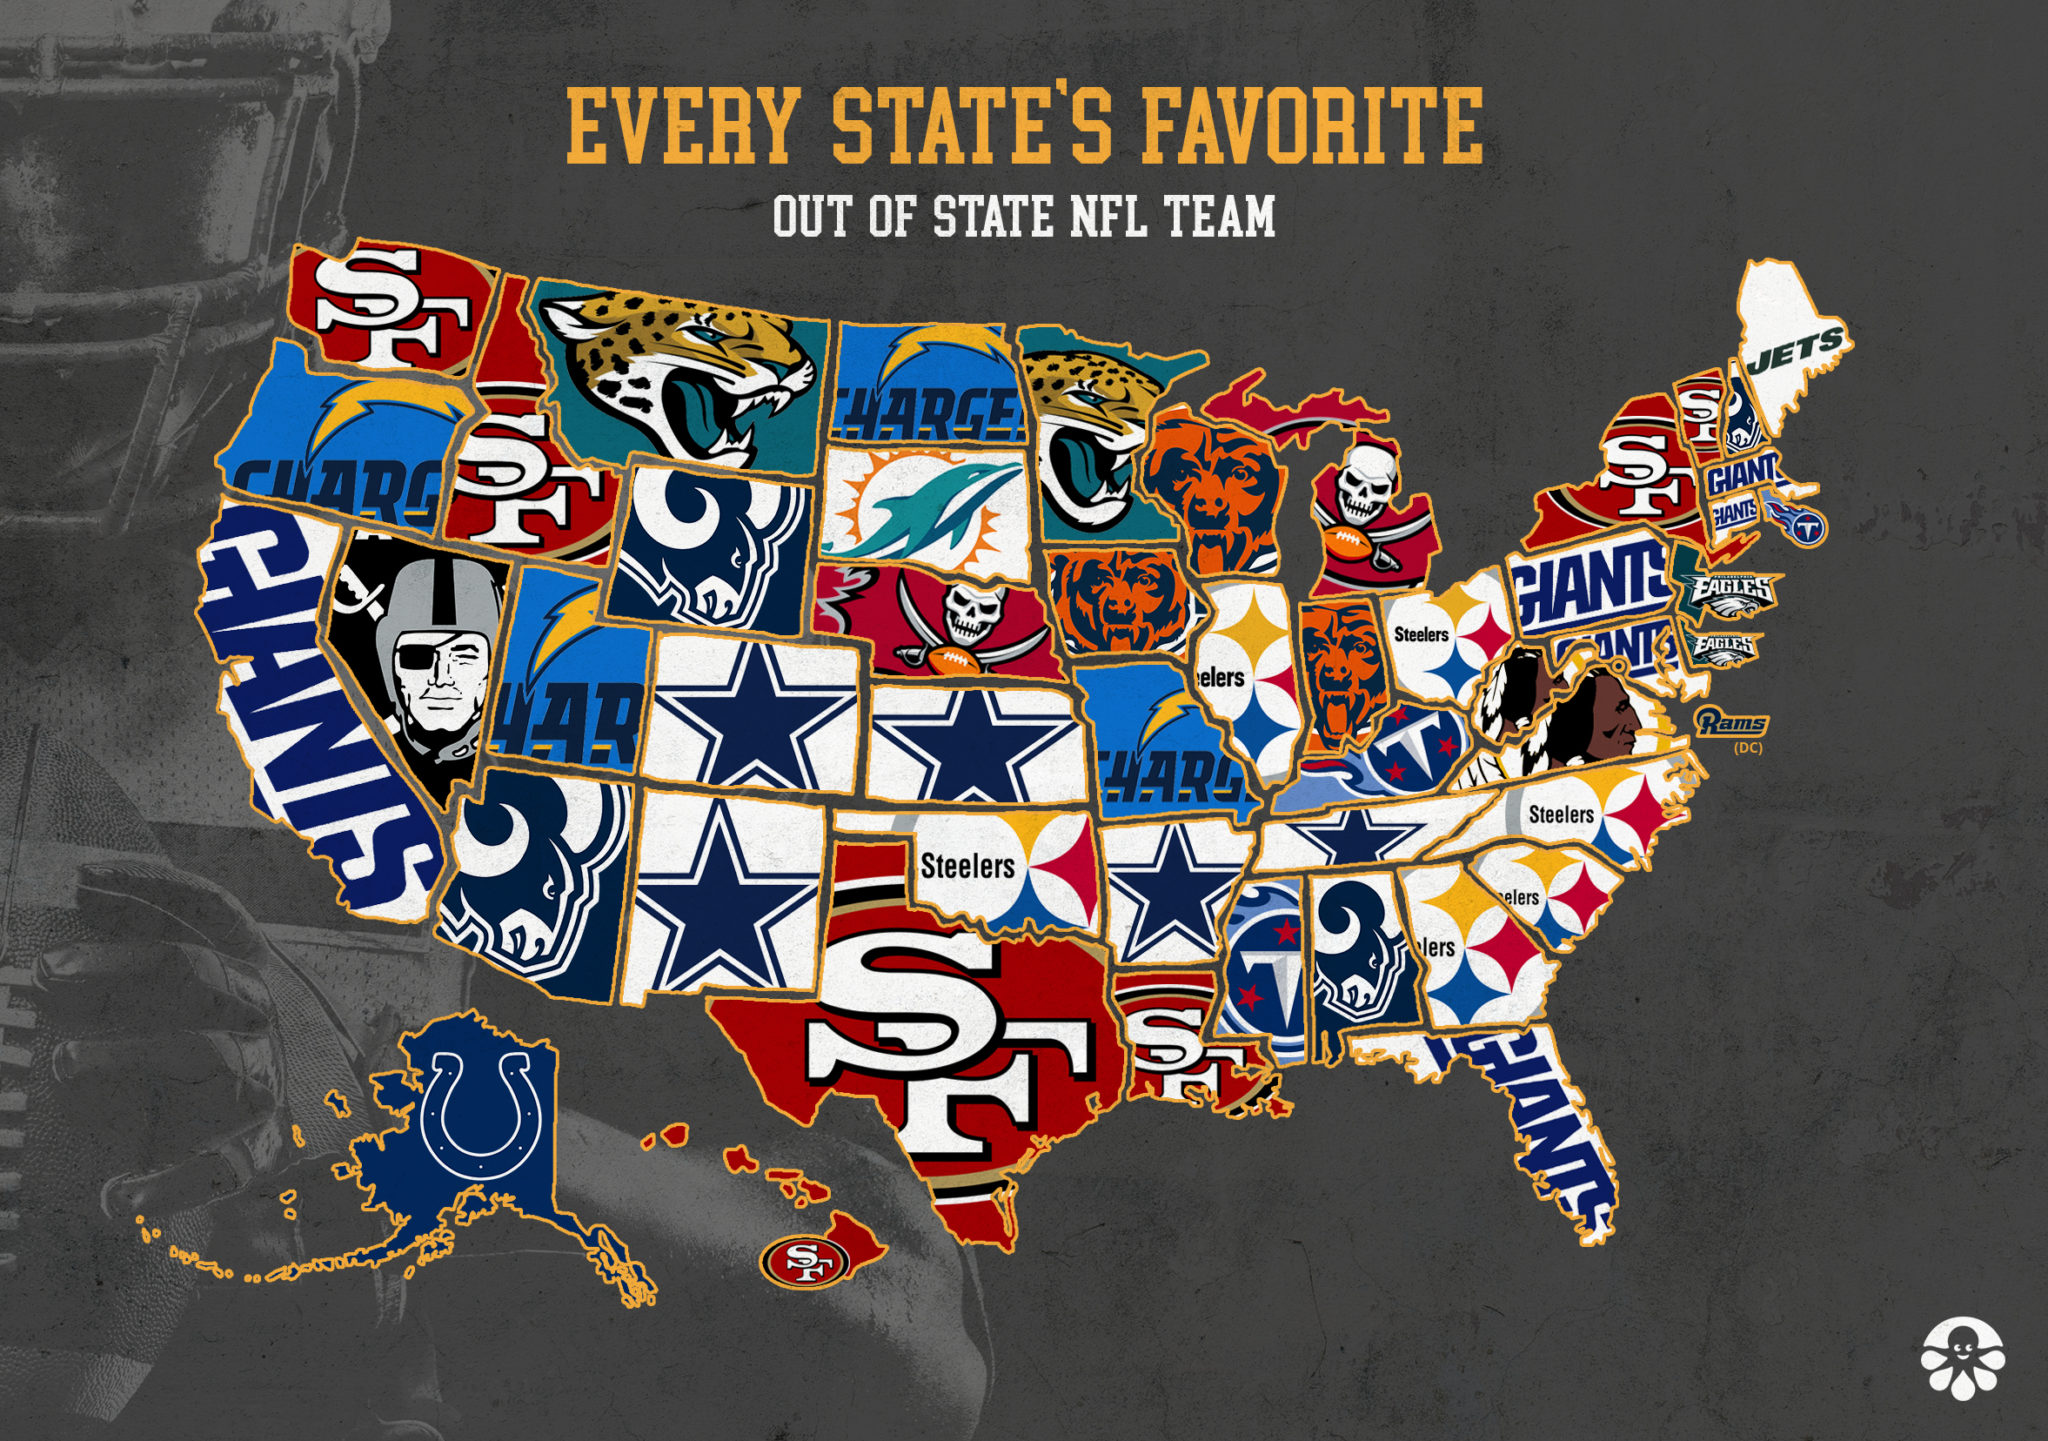 US Map of Favorite Out of State NFL Teams